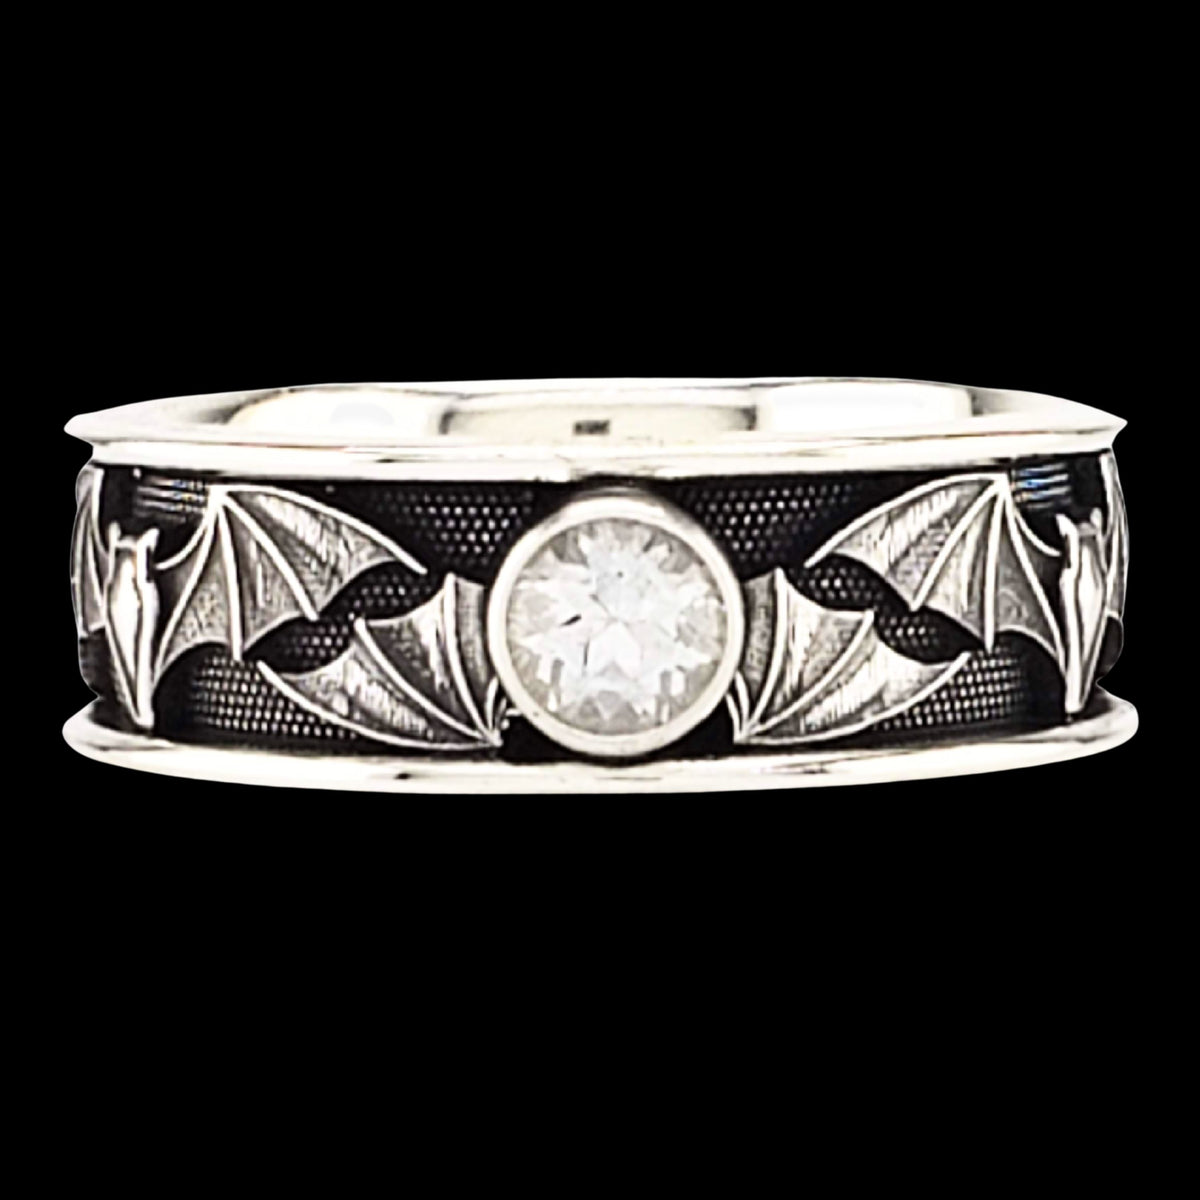 BAT WIDE SOLITAIRE Band Ring in SILVER &amp; CONTINUUM with CHOICE OF 5mm GEMSTONES - Staring at $249